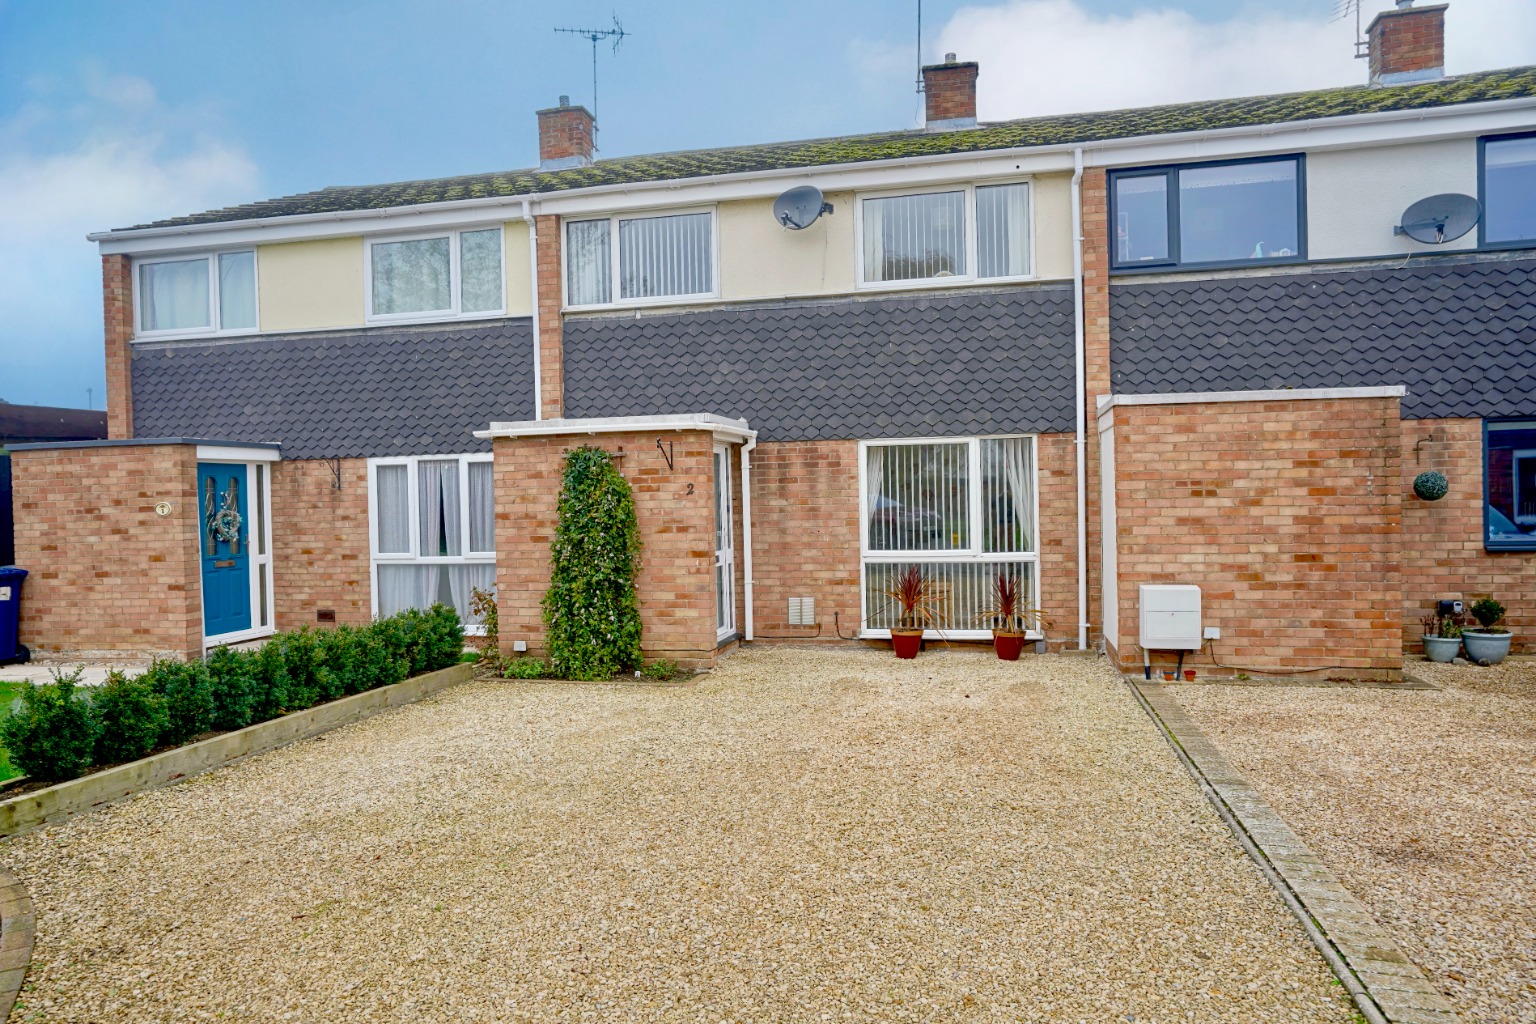 3 bed terraced house for sale in Saxon Close, Huntingdon - Property Image 1